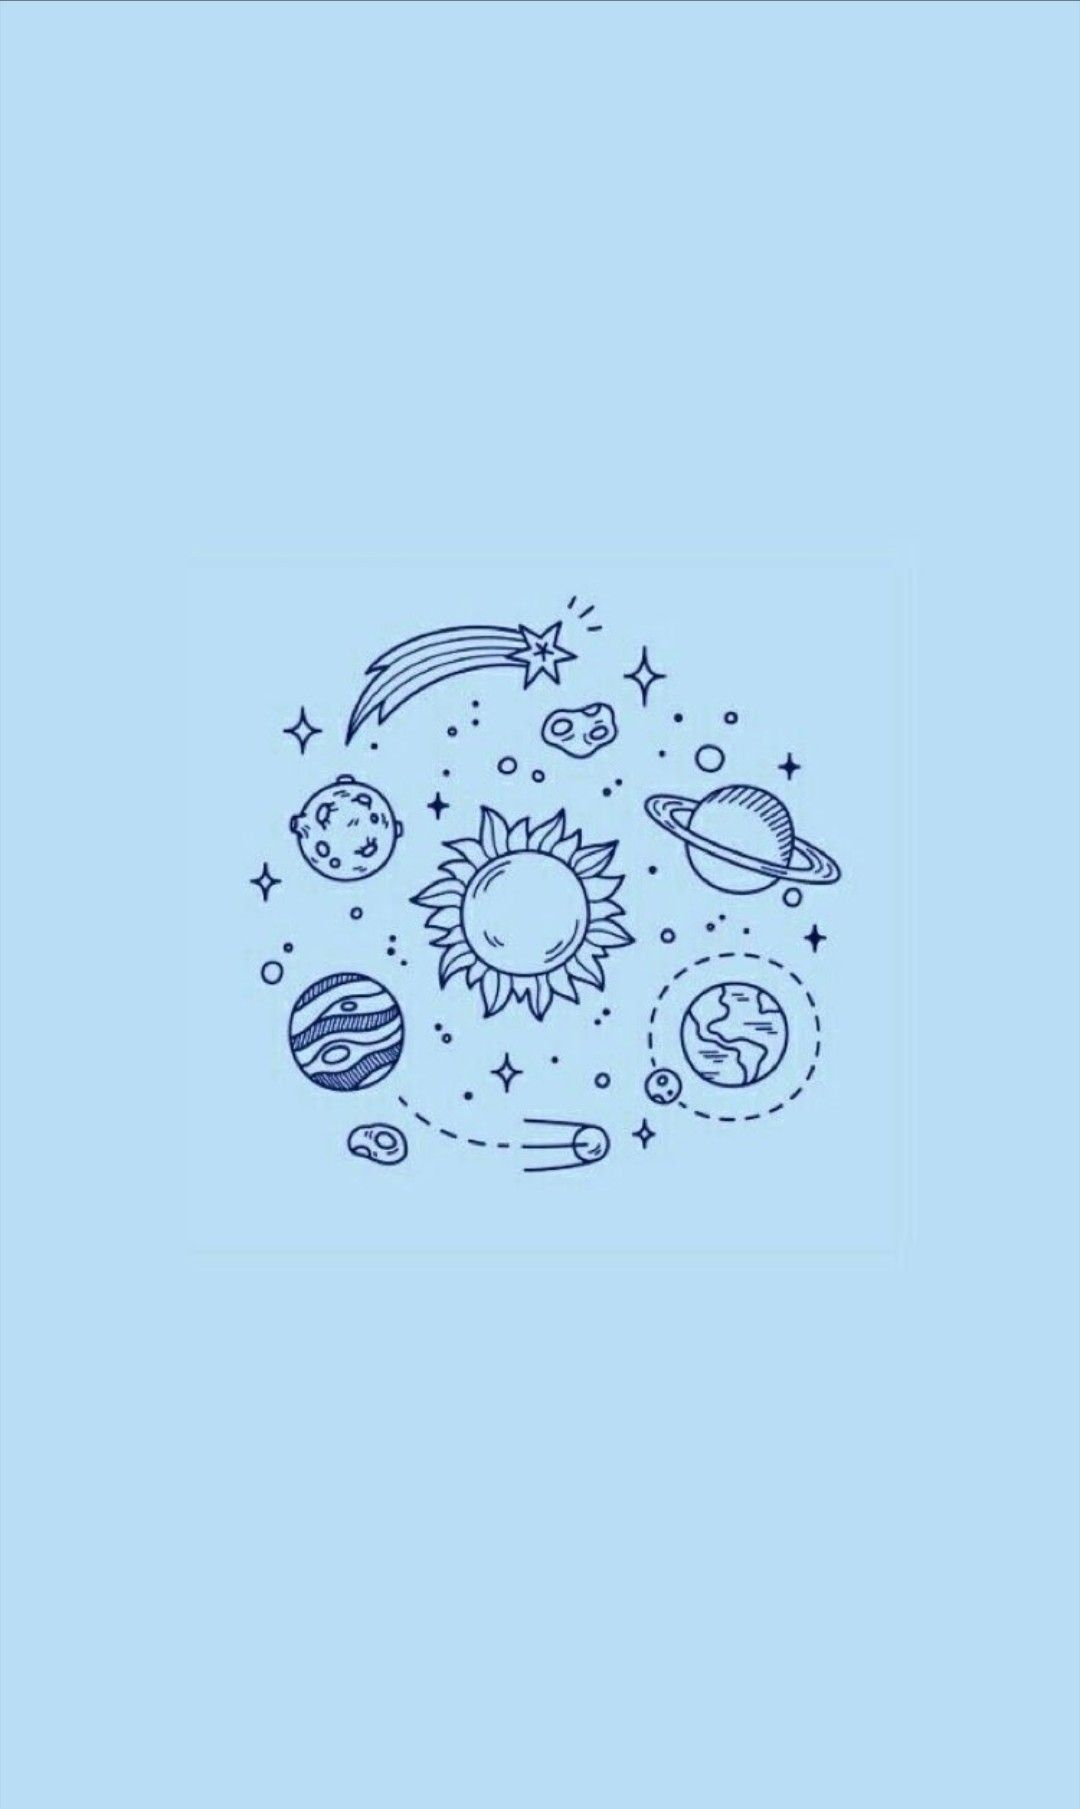 Aesthetic wallpaper background blue with the solar system - Pastel